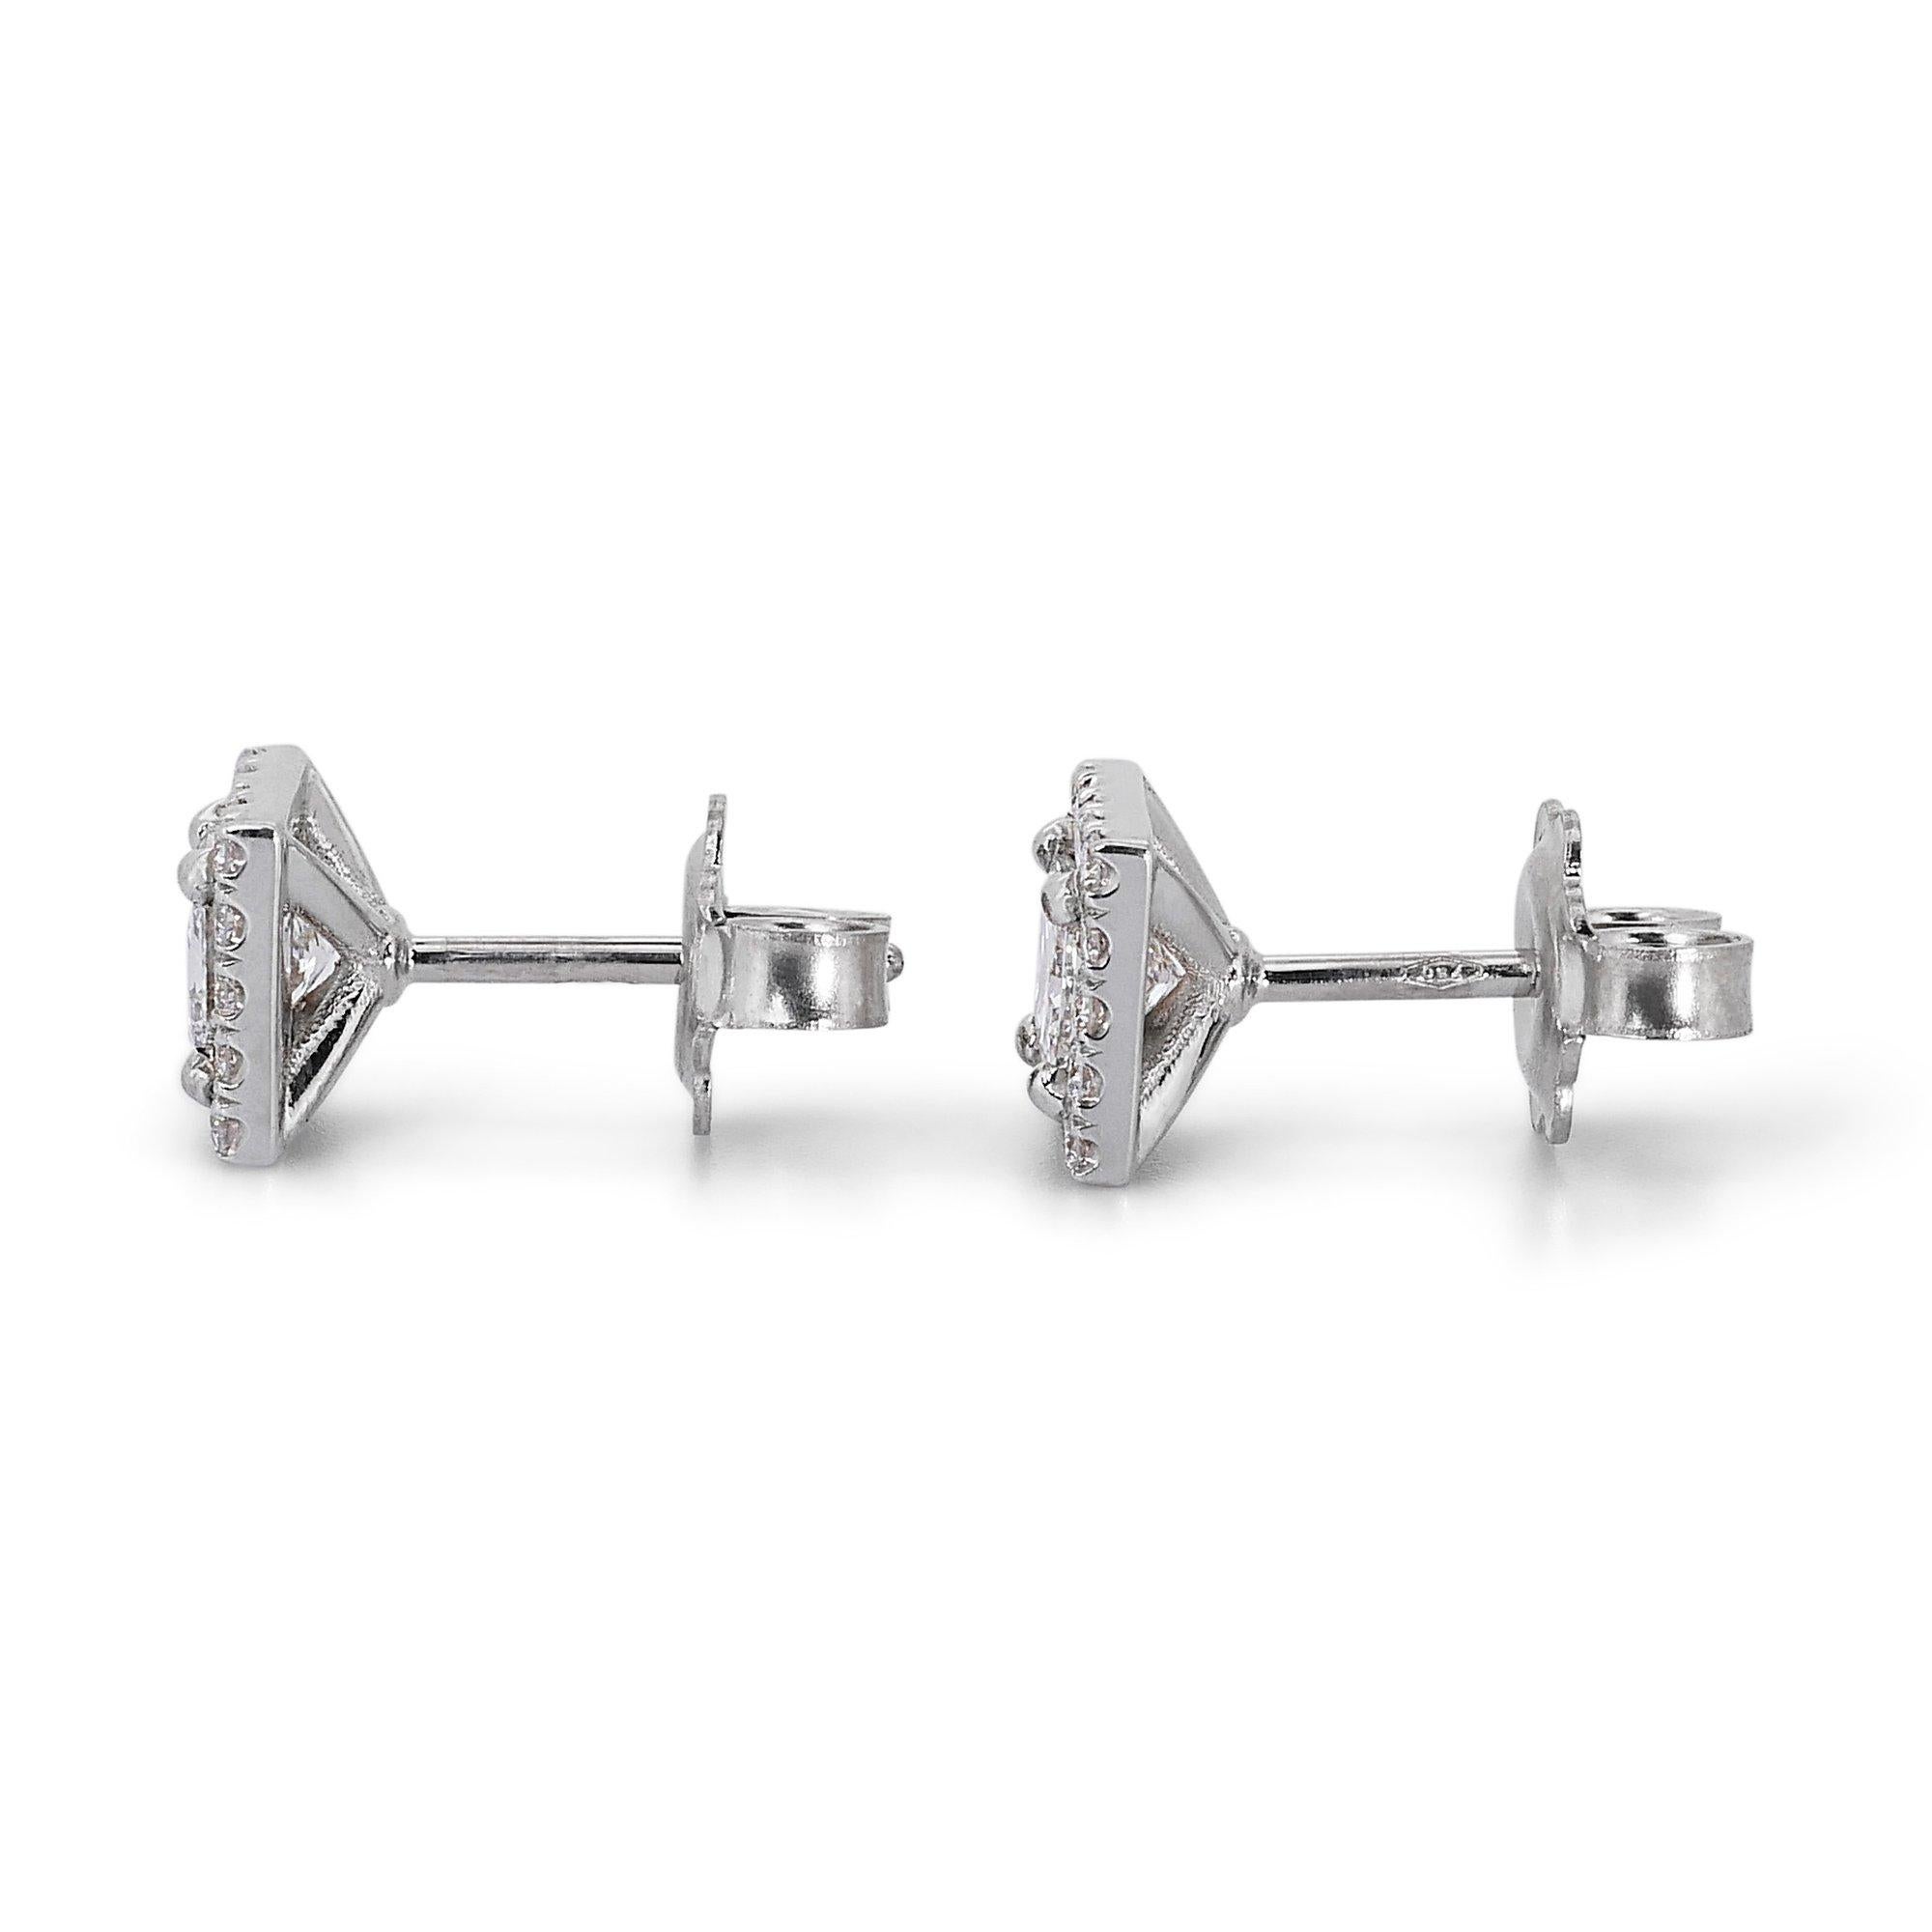 Enchanting 1.33ct Diamond Halo Stud Earrings in 18k White Gold - GIA Certified  For Sale 2